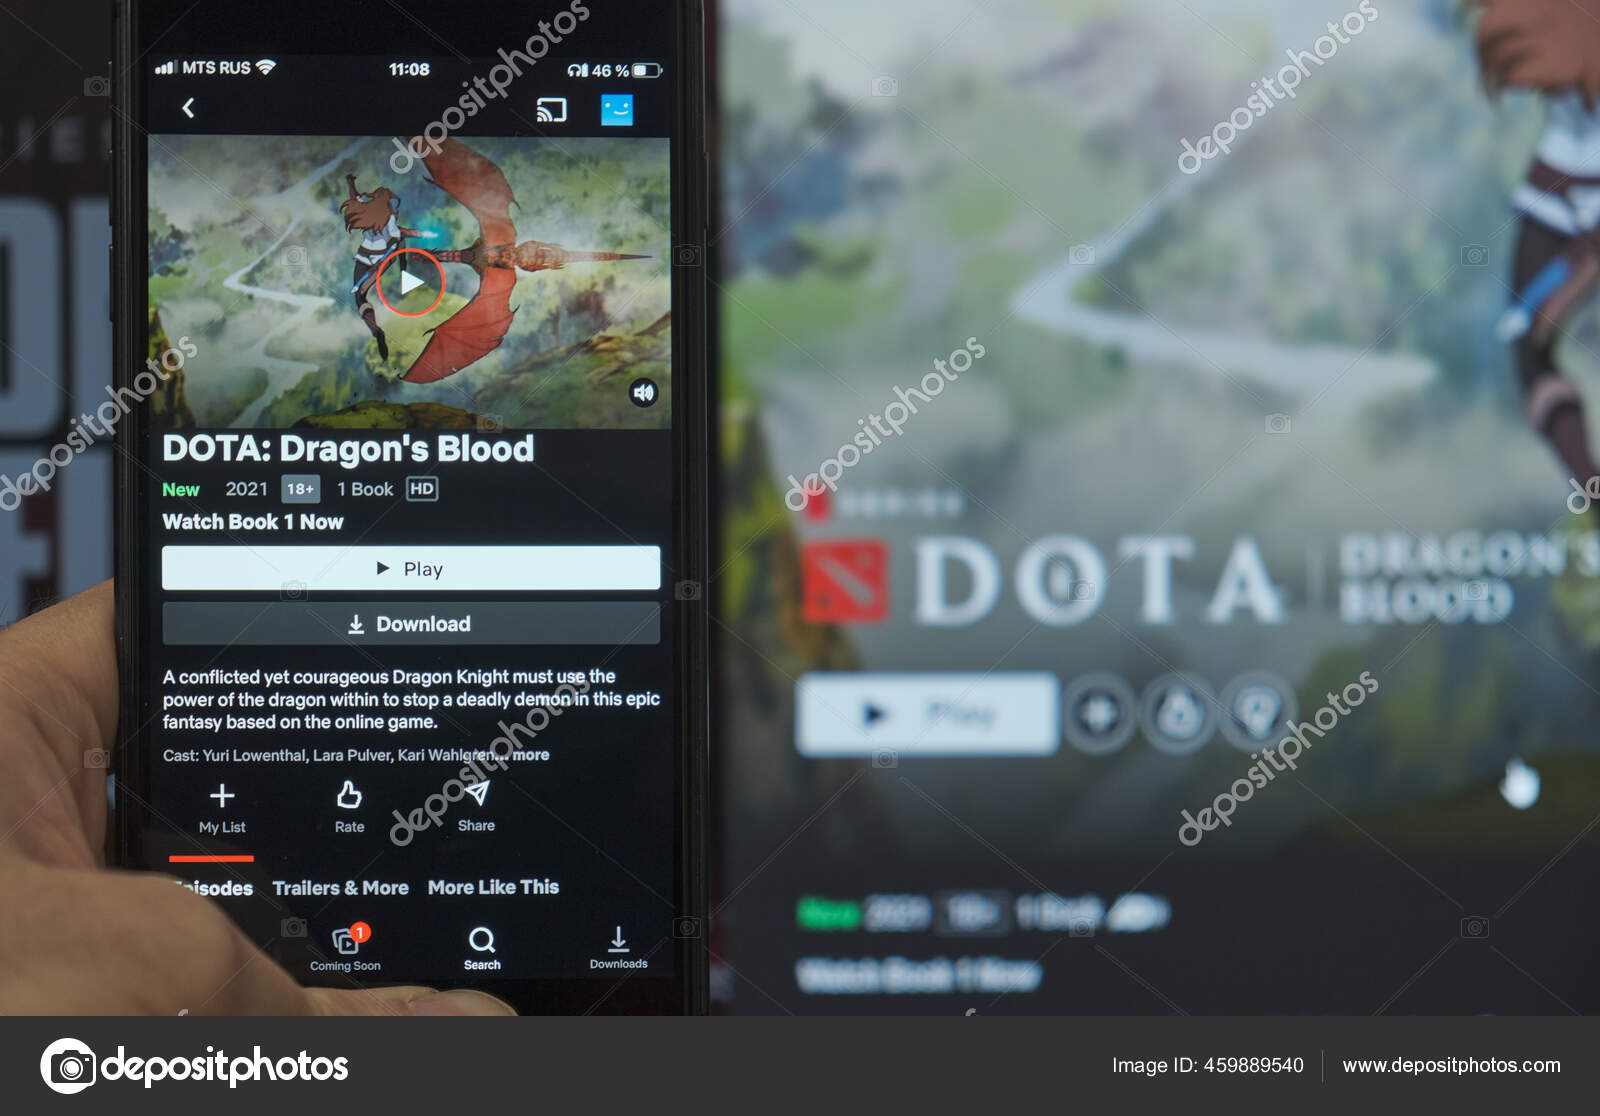 Dota Dragons Blood is an American adult animated fantasy streaming television show on Netflix, New anime series based on video game Dota, Moscow 25 March 2021